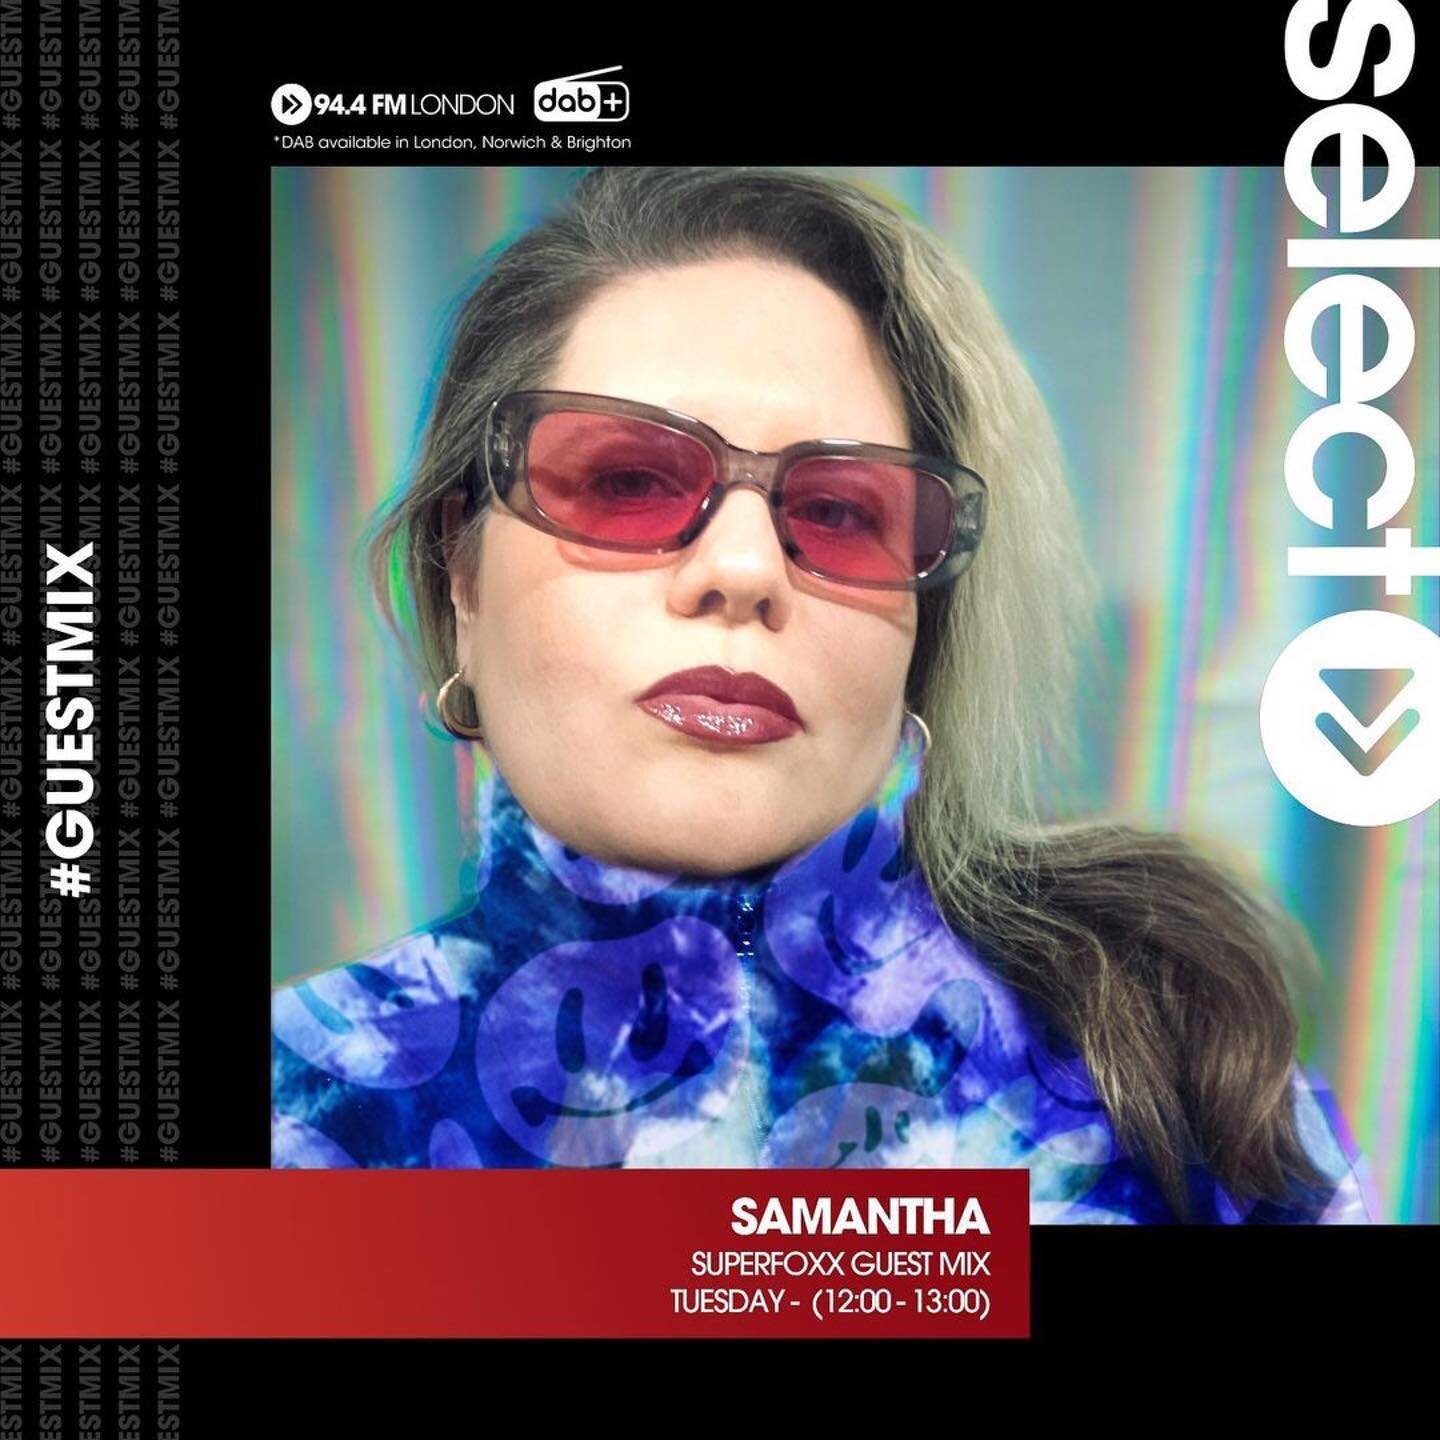 Listen live every Tuesday at 11.00am to @krystalroxx new show on @selectradioapp 

Expect the best new house and dance music and all the positive energy you need to power you through the rest of the week! 

This weeks guest mix is from @samanthaldn a